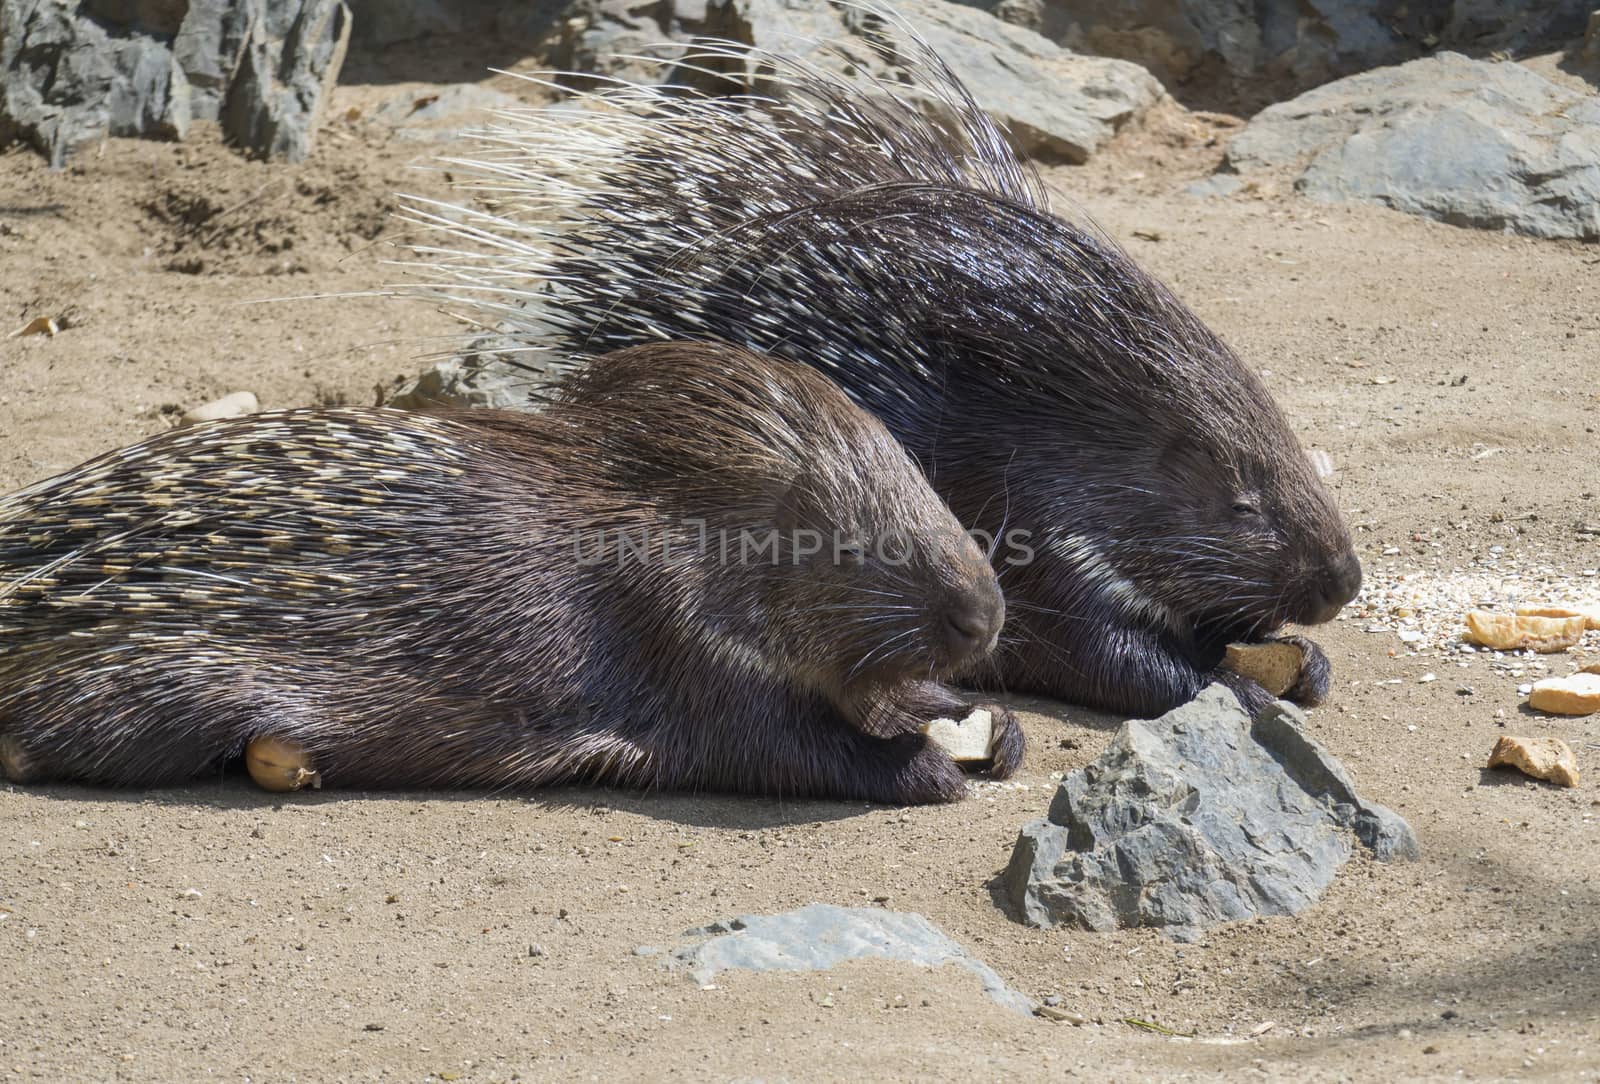 Close up portrait of Indian Crested Porcupine, Hystrix indica couple eating vegetables and bread, outdoor sand and rock background